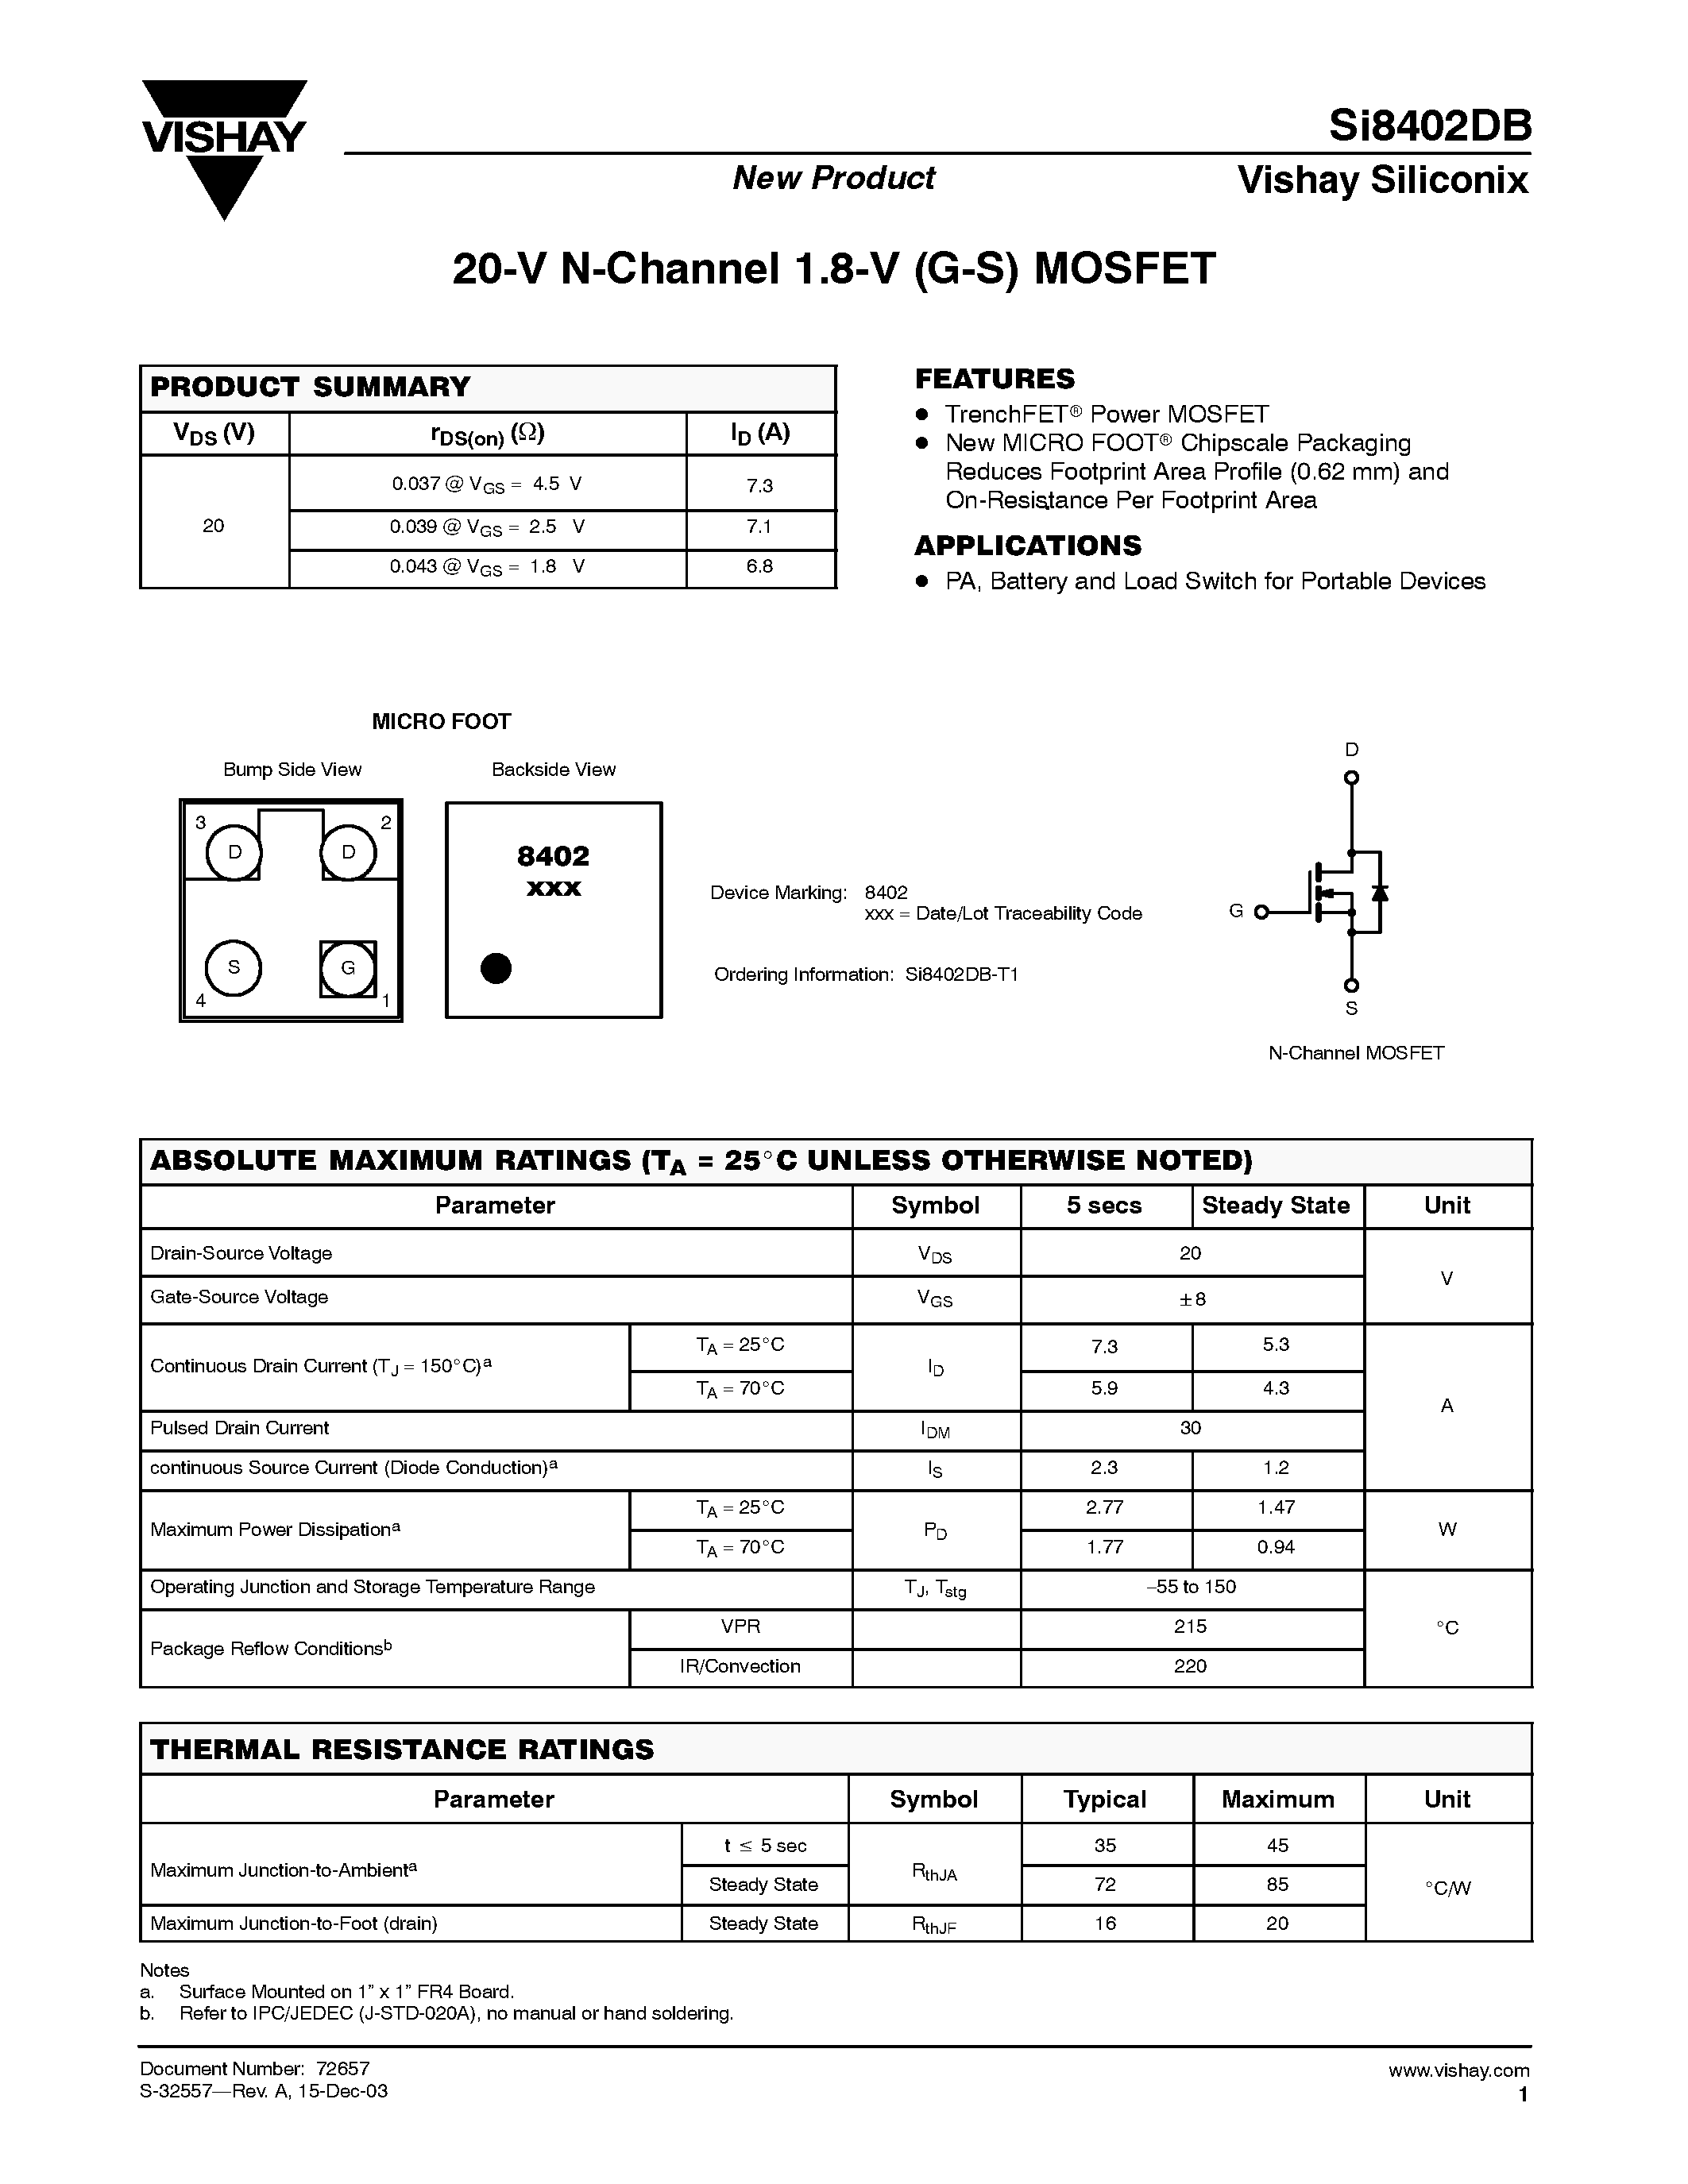 Datasheet SI8402DB - 20-V N-Channel 1.8-V (G-S) MOSFET page 1